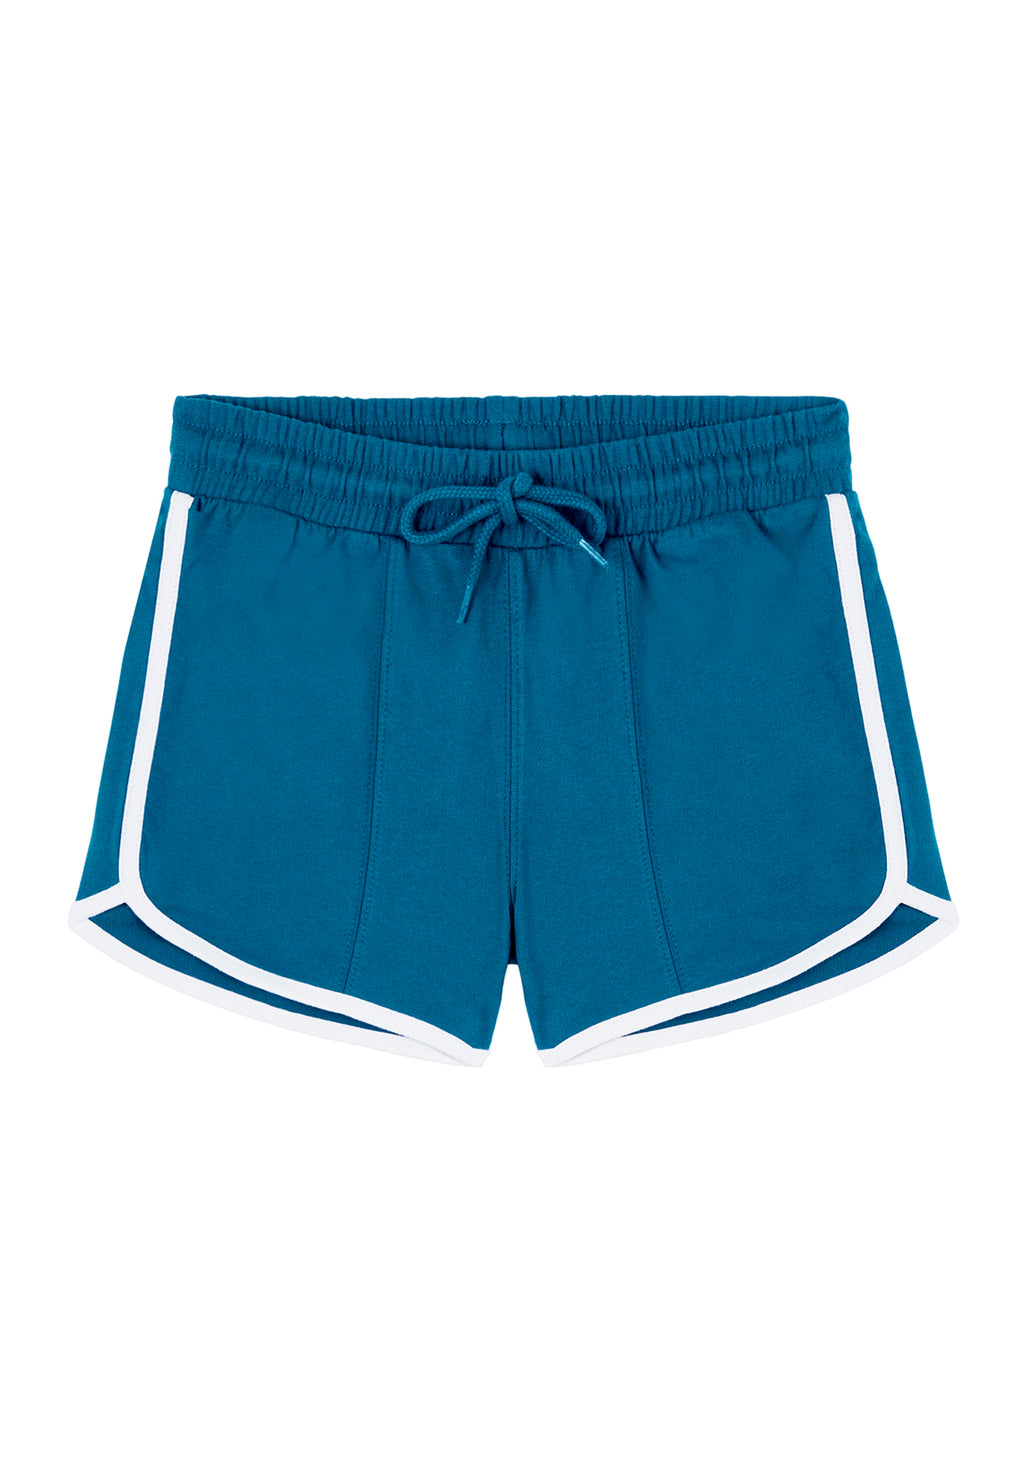 Blue and White Girls Retro Track Shorts by Gen Woo